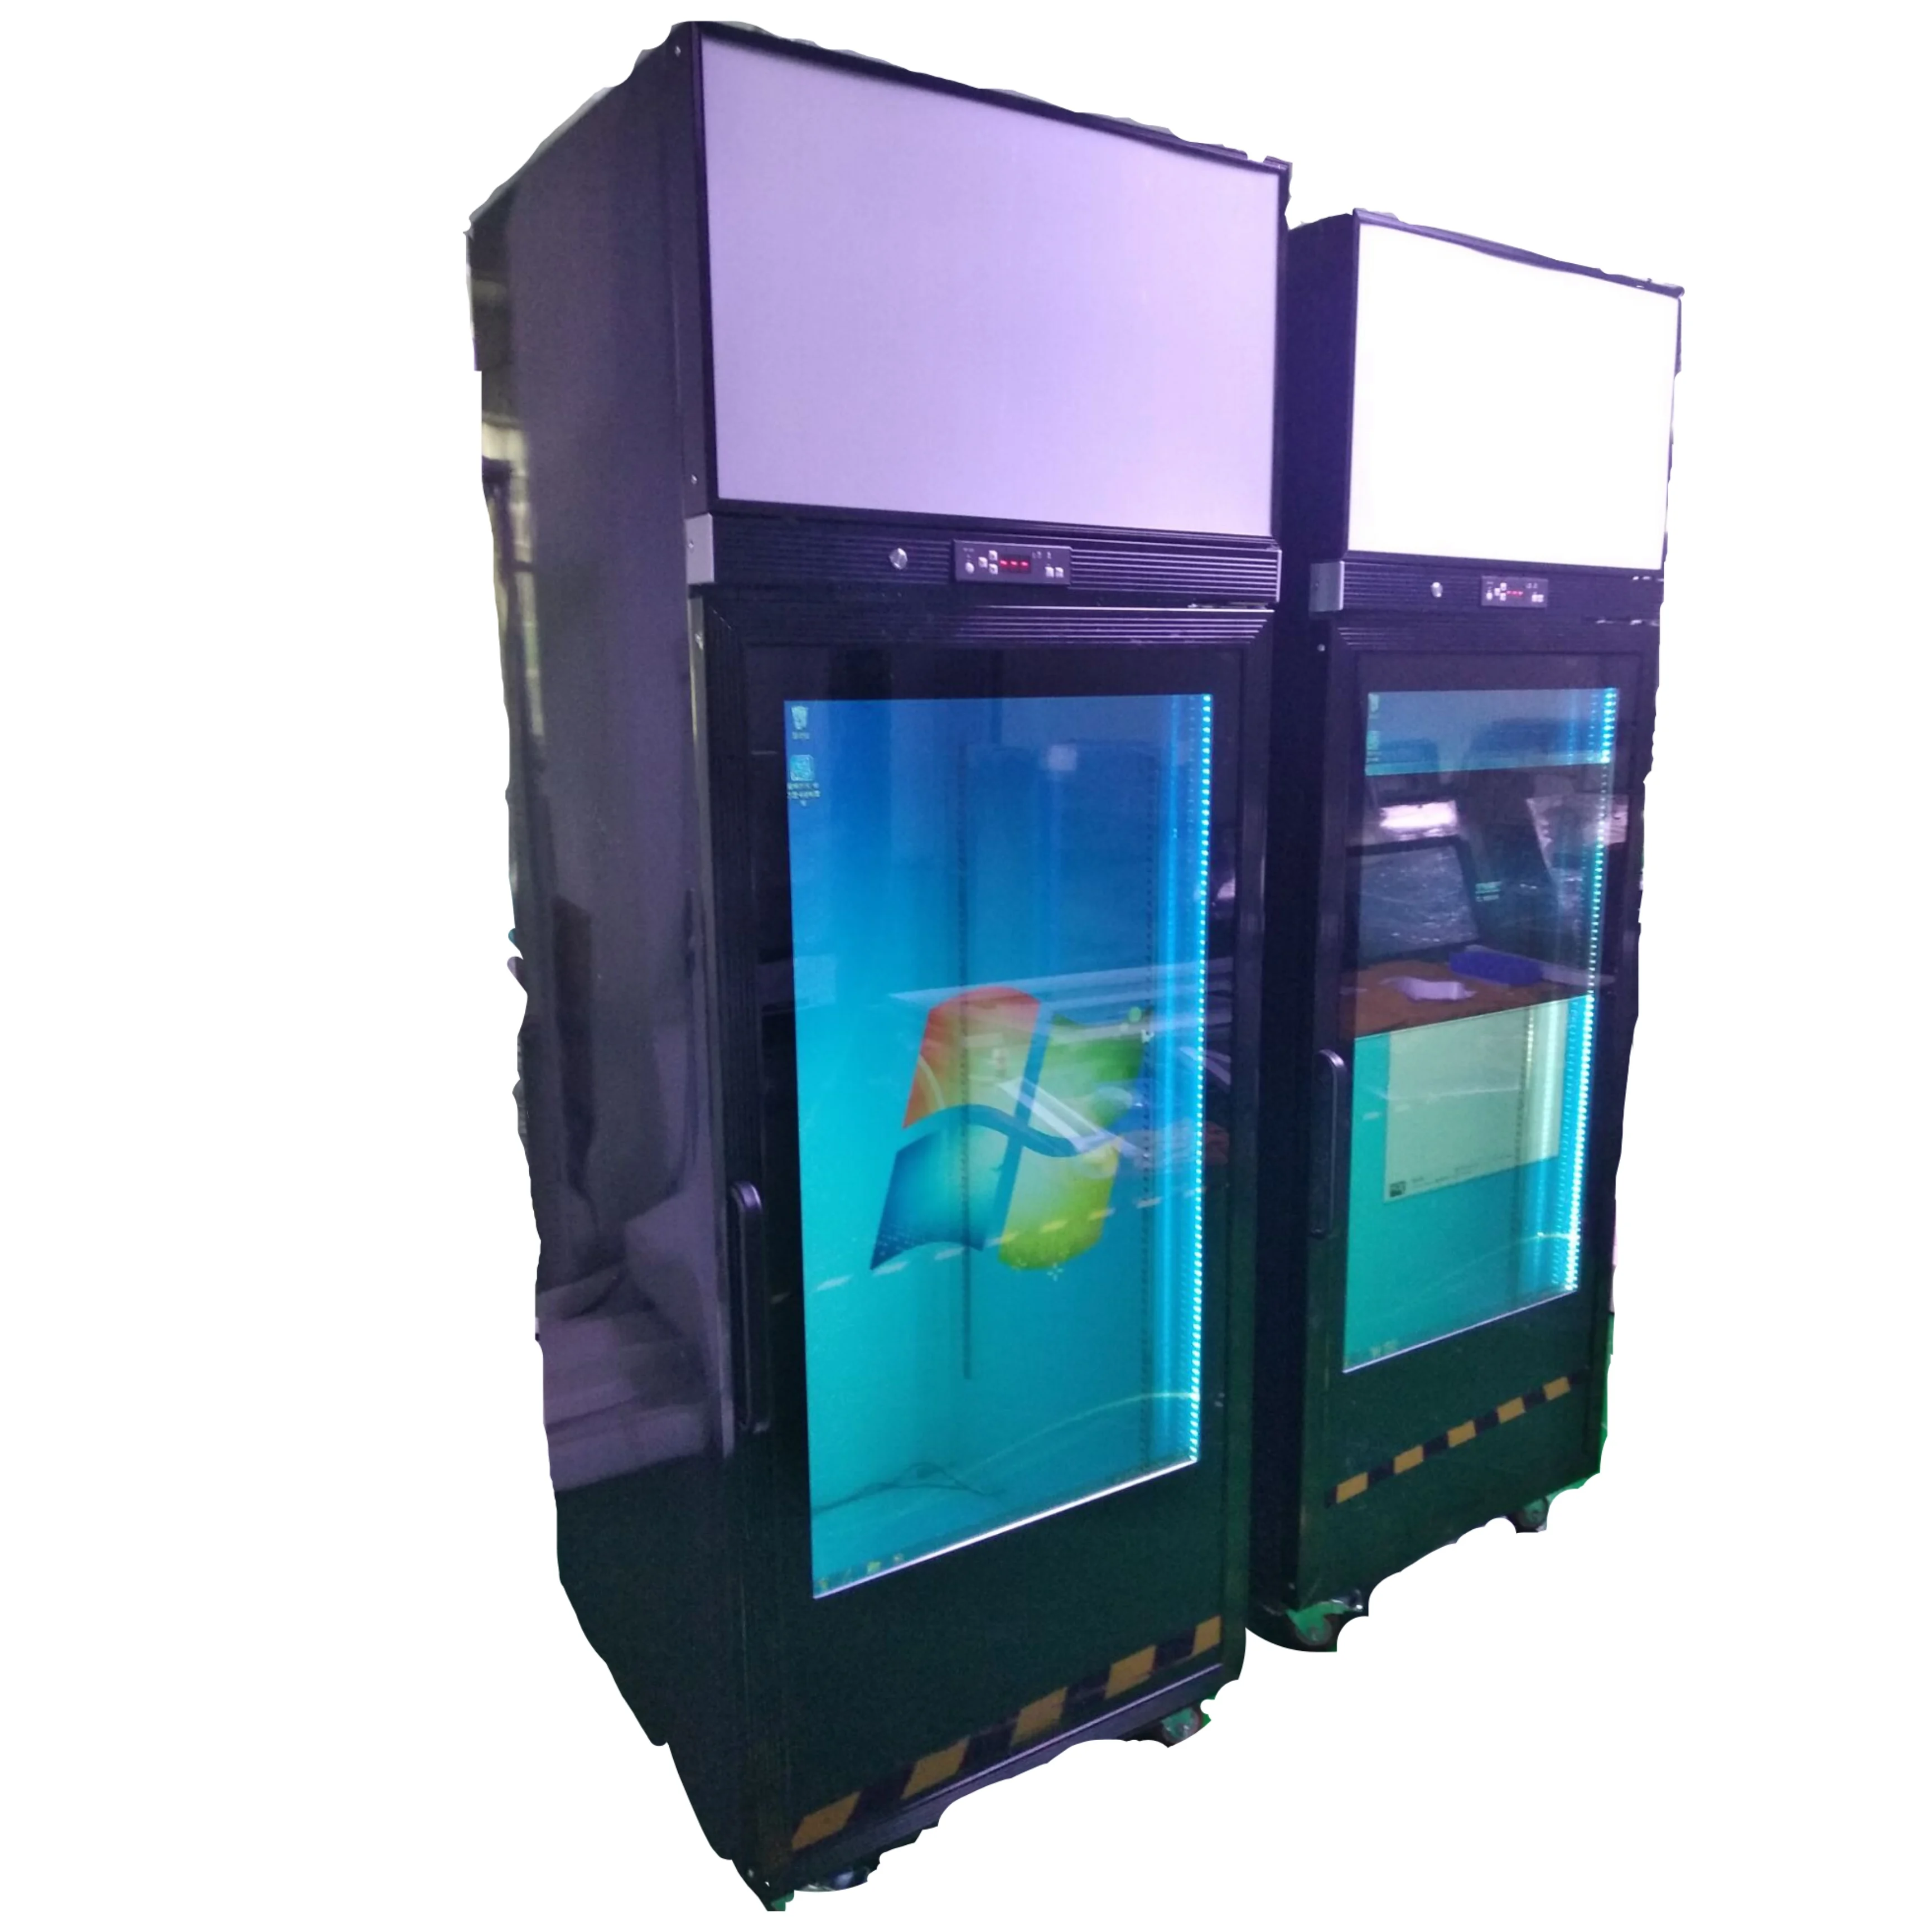 see through transparent android display fridge doors for beer with LCD advertising displays